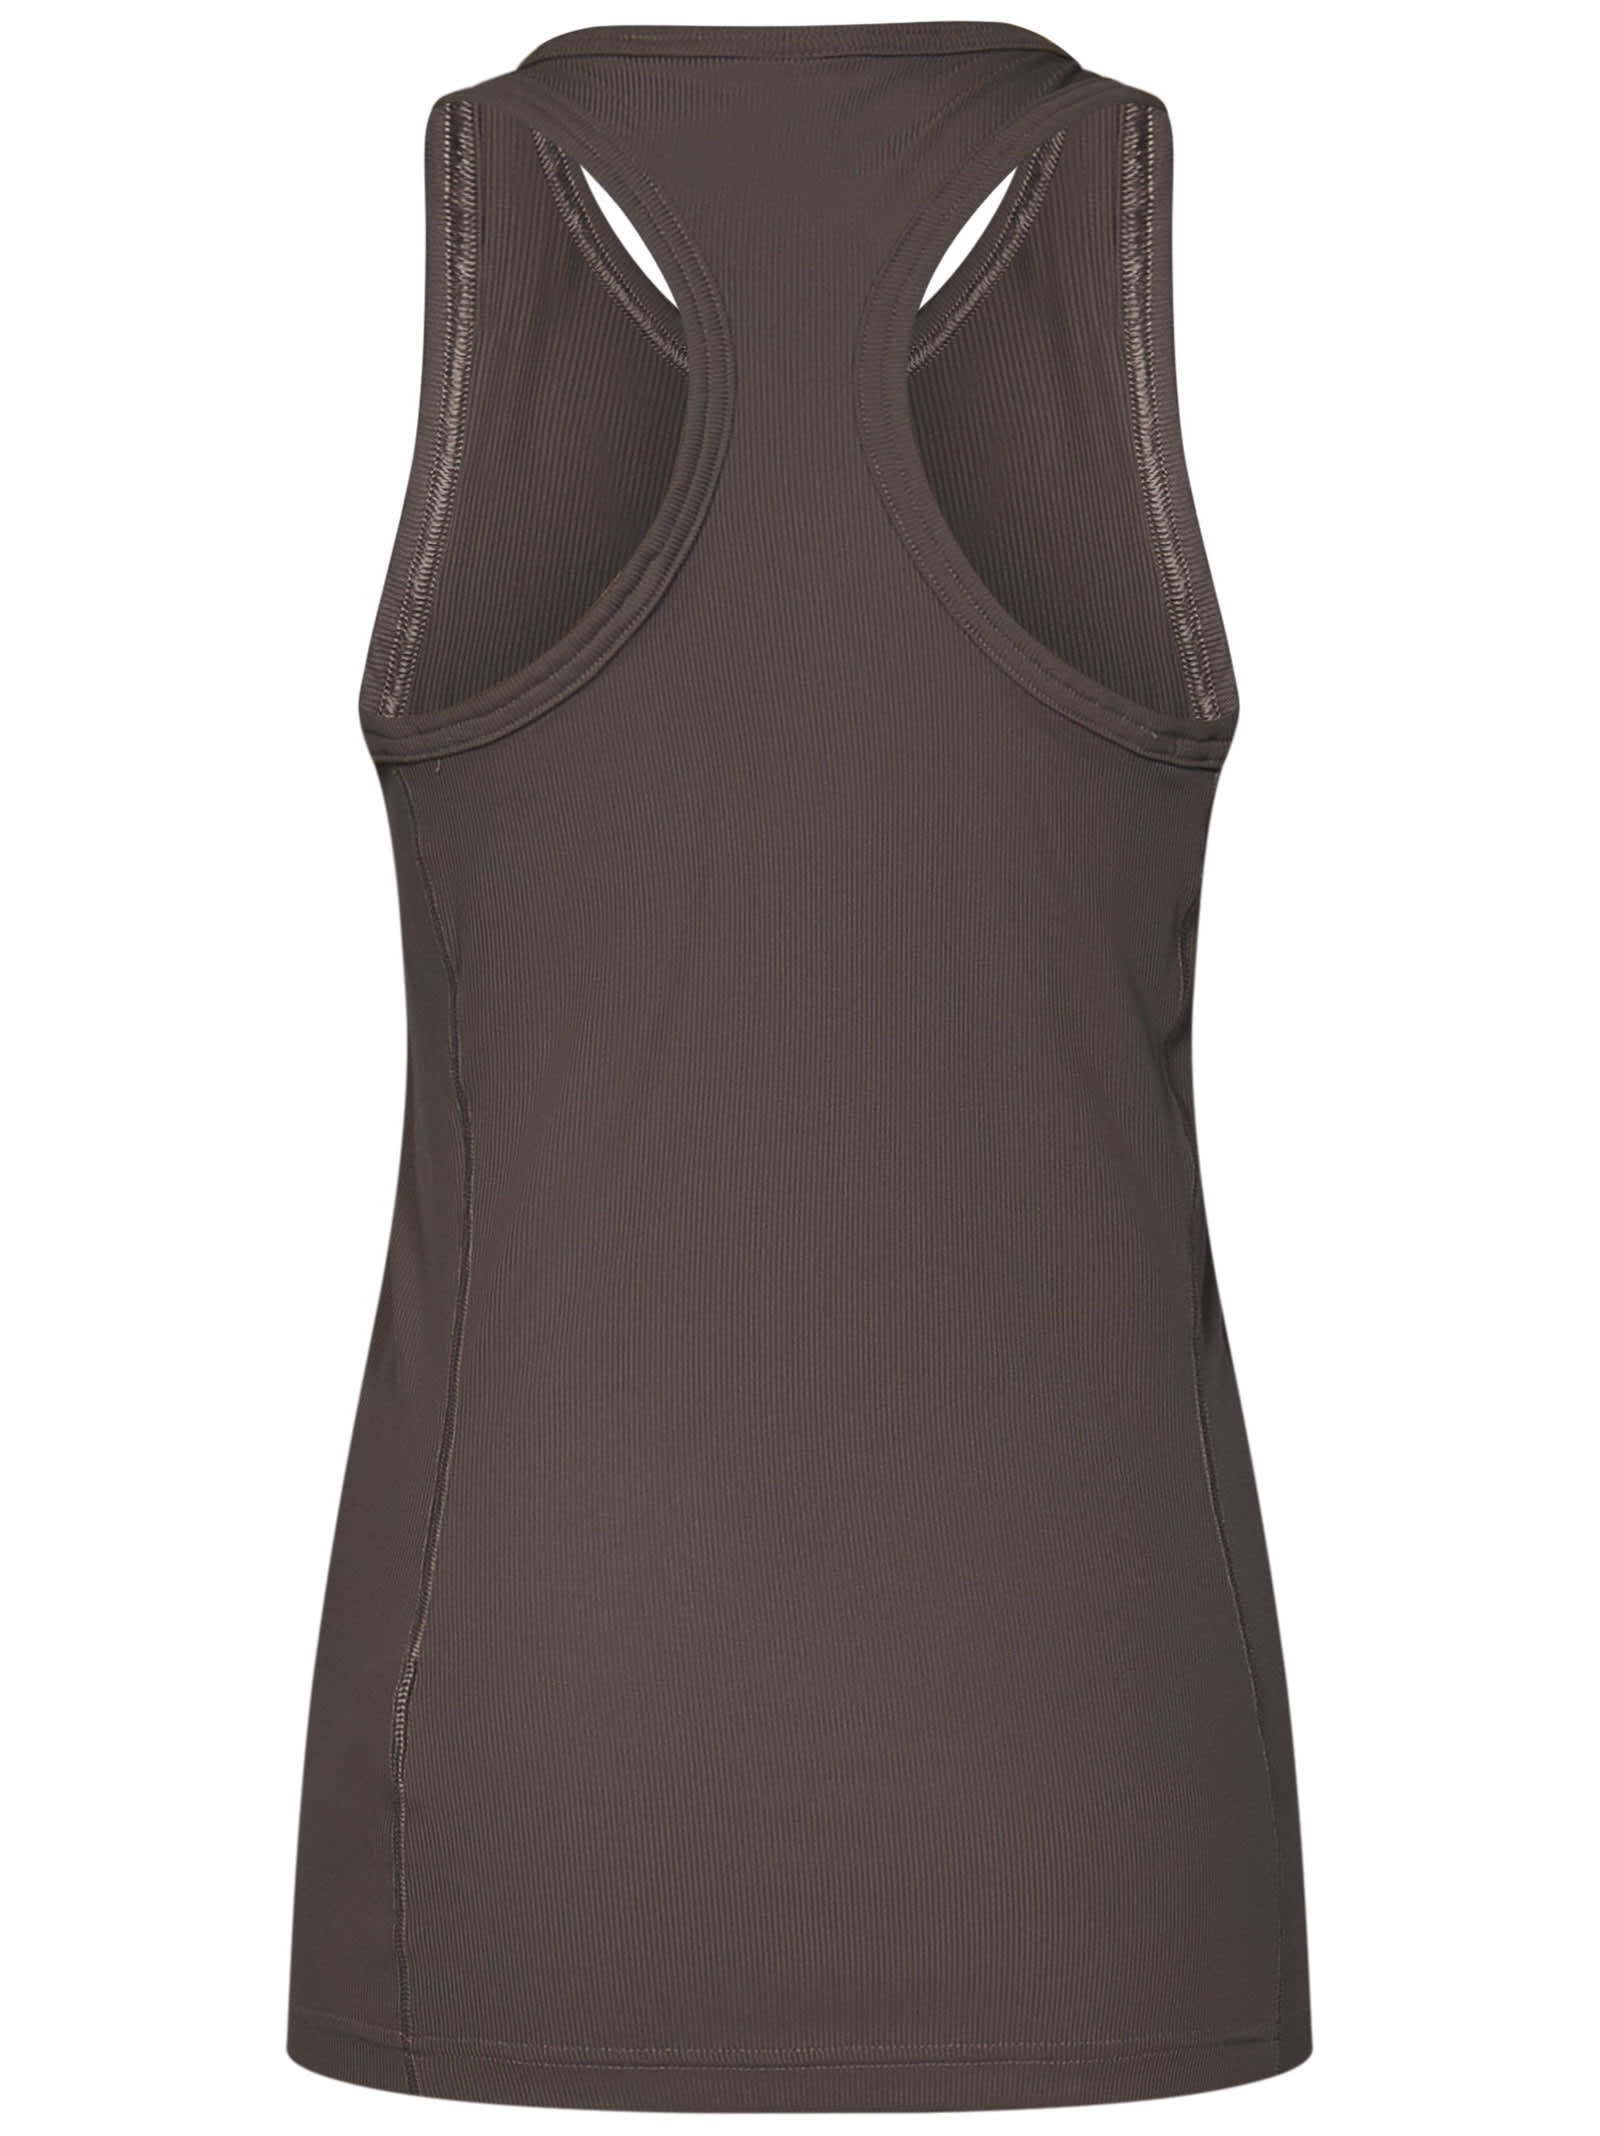 Shop Adidas By Stella Mccartney Top In Taupe